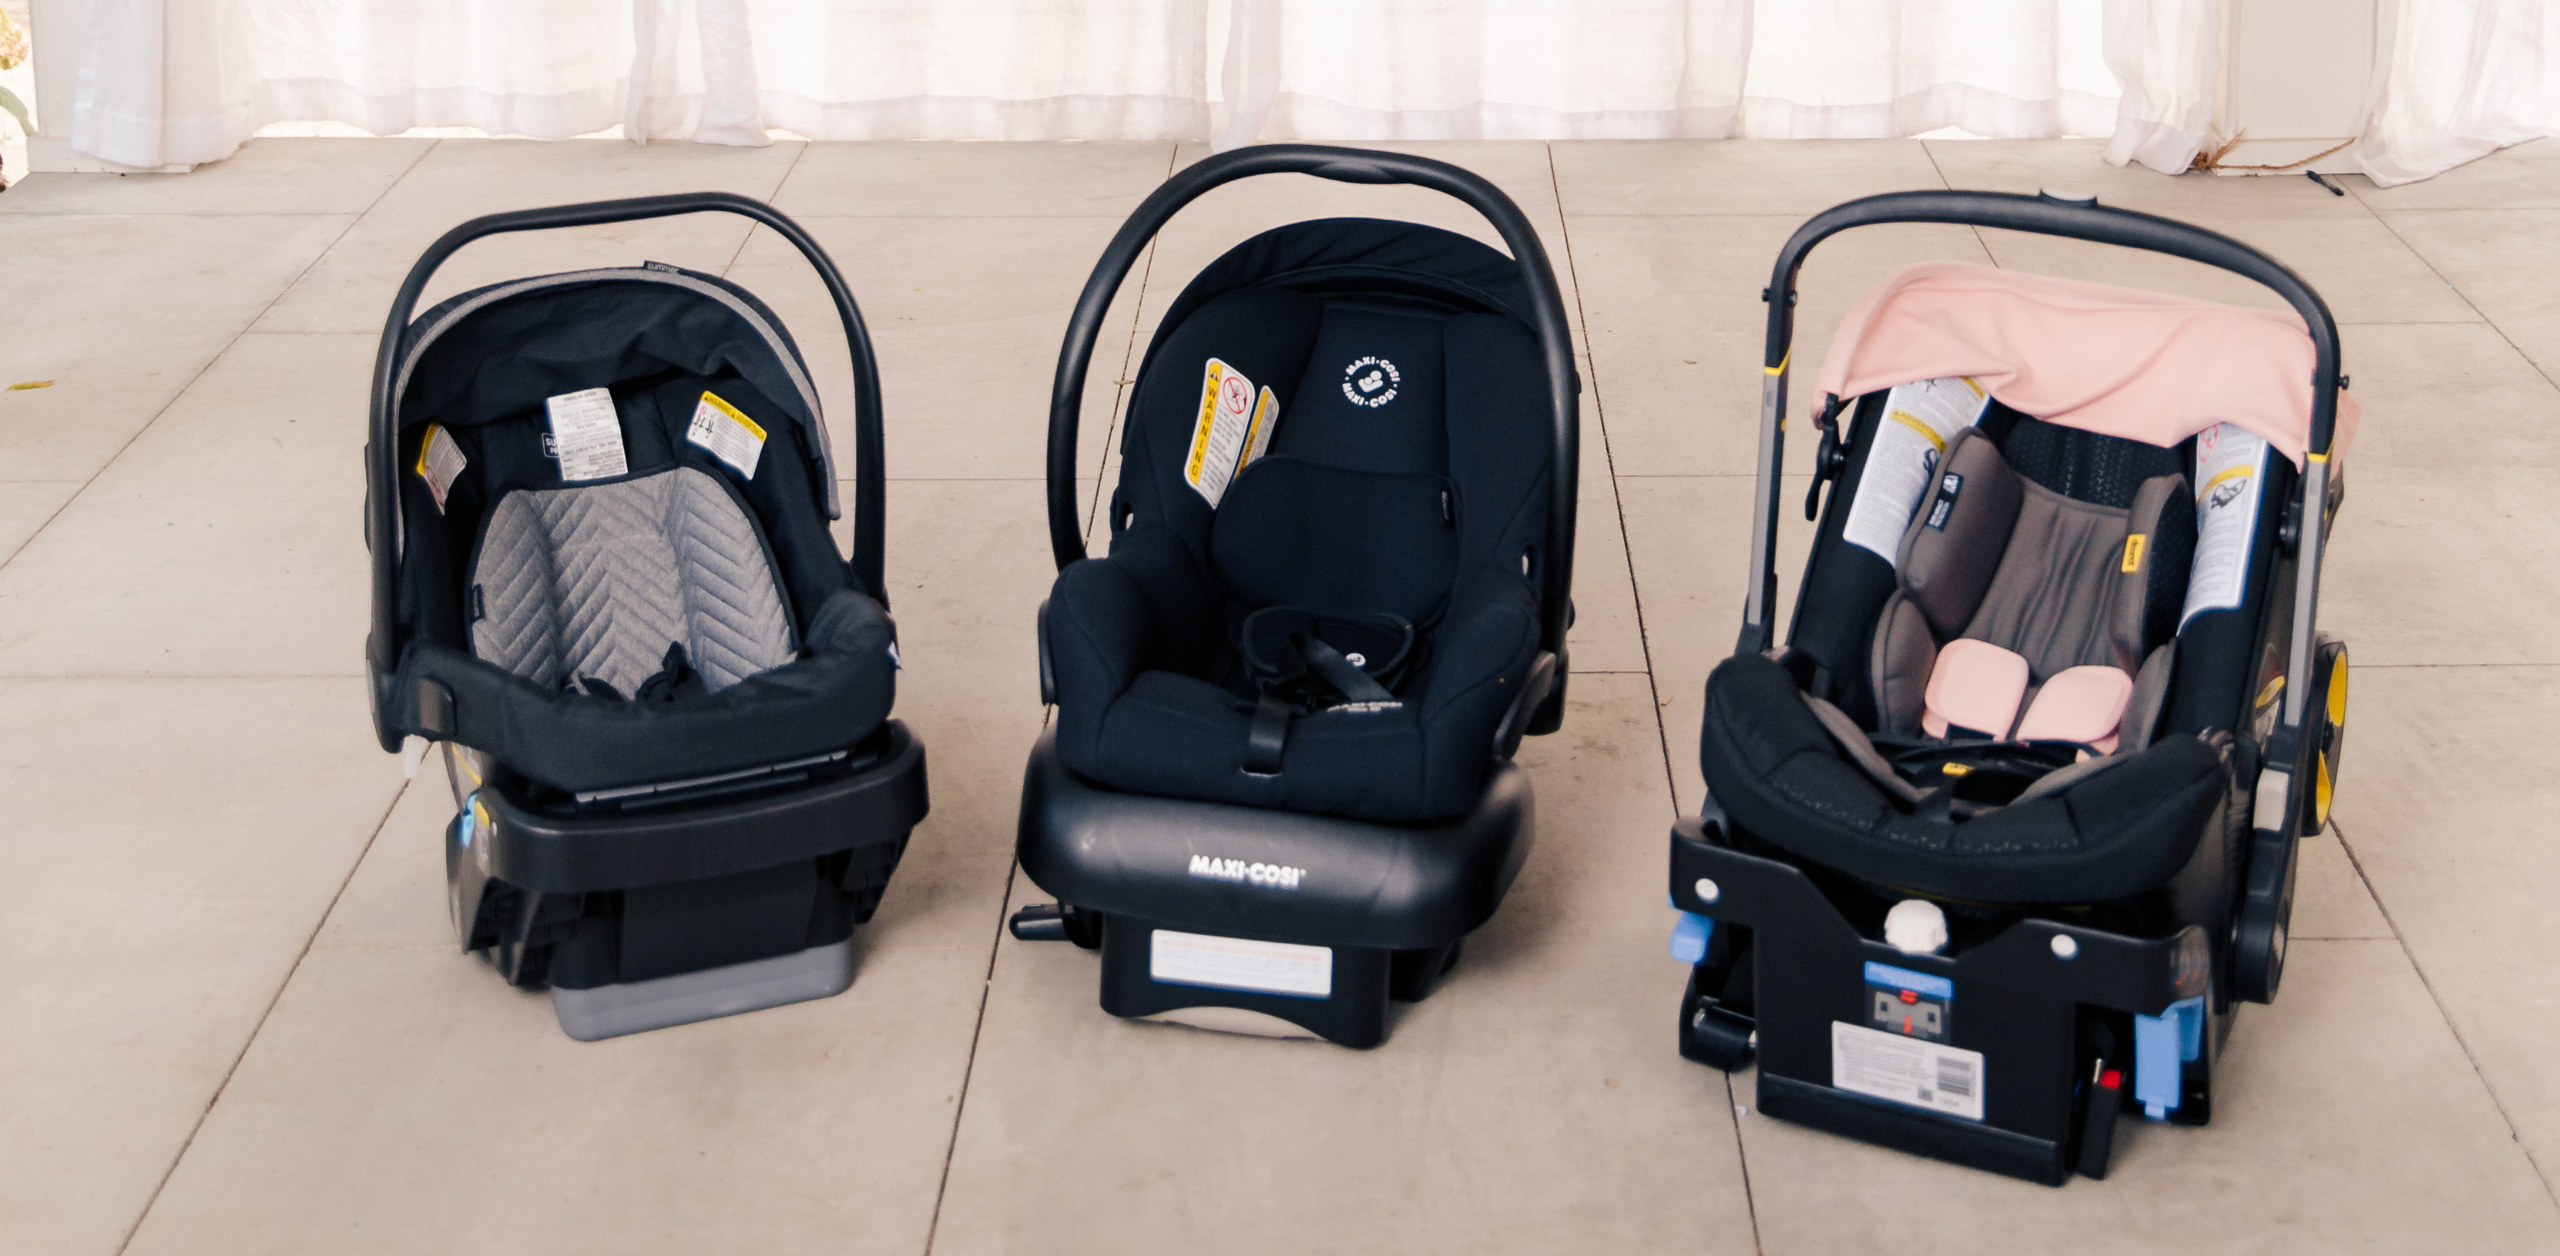 How to Store an Infant Car Seat